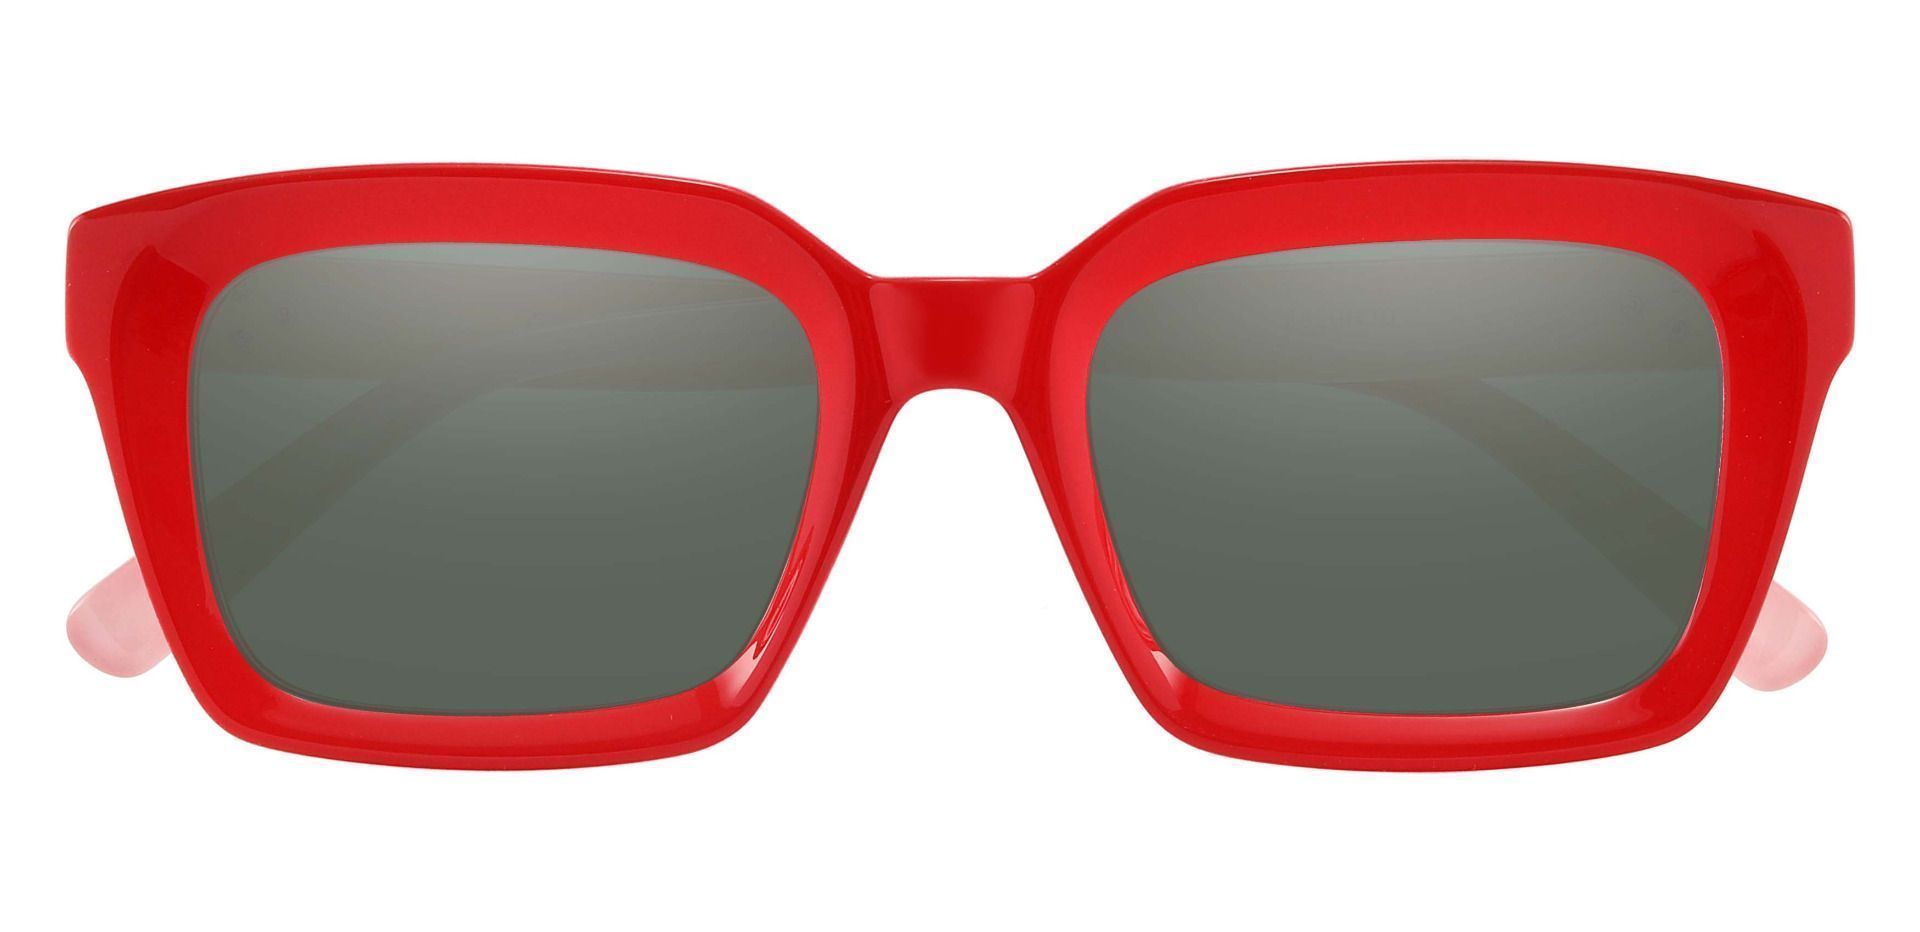 Unity Rectangle Non-Rx Sunglasses - Red Frame With Green Lenses